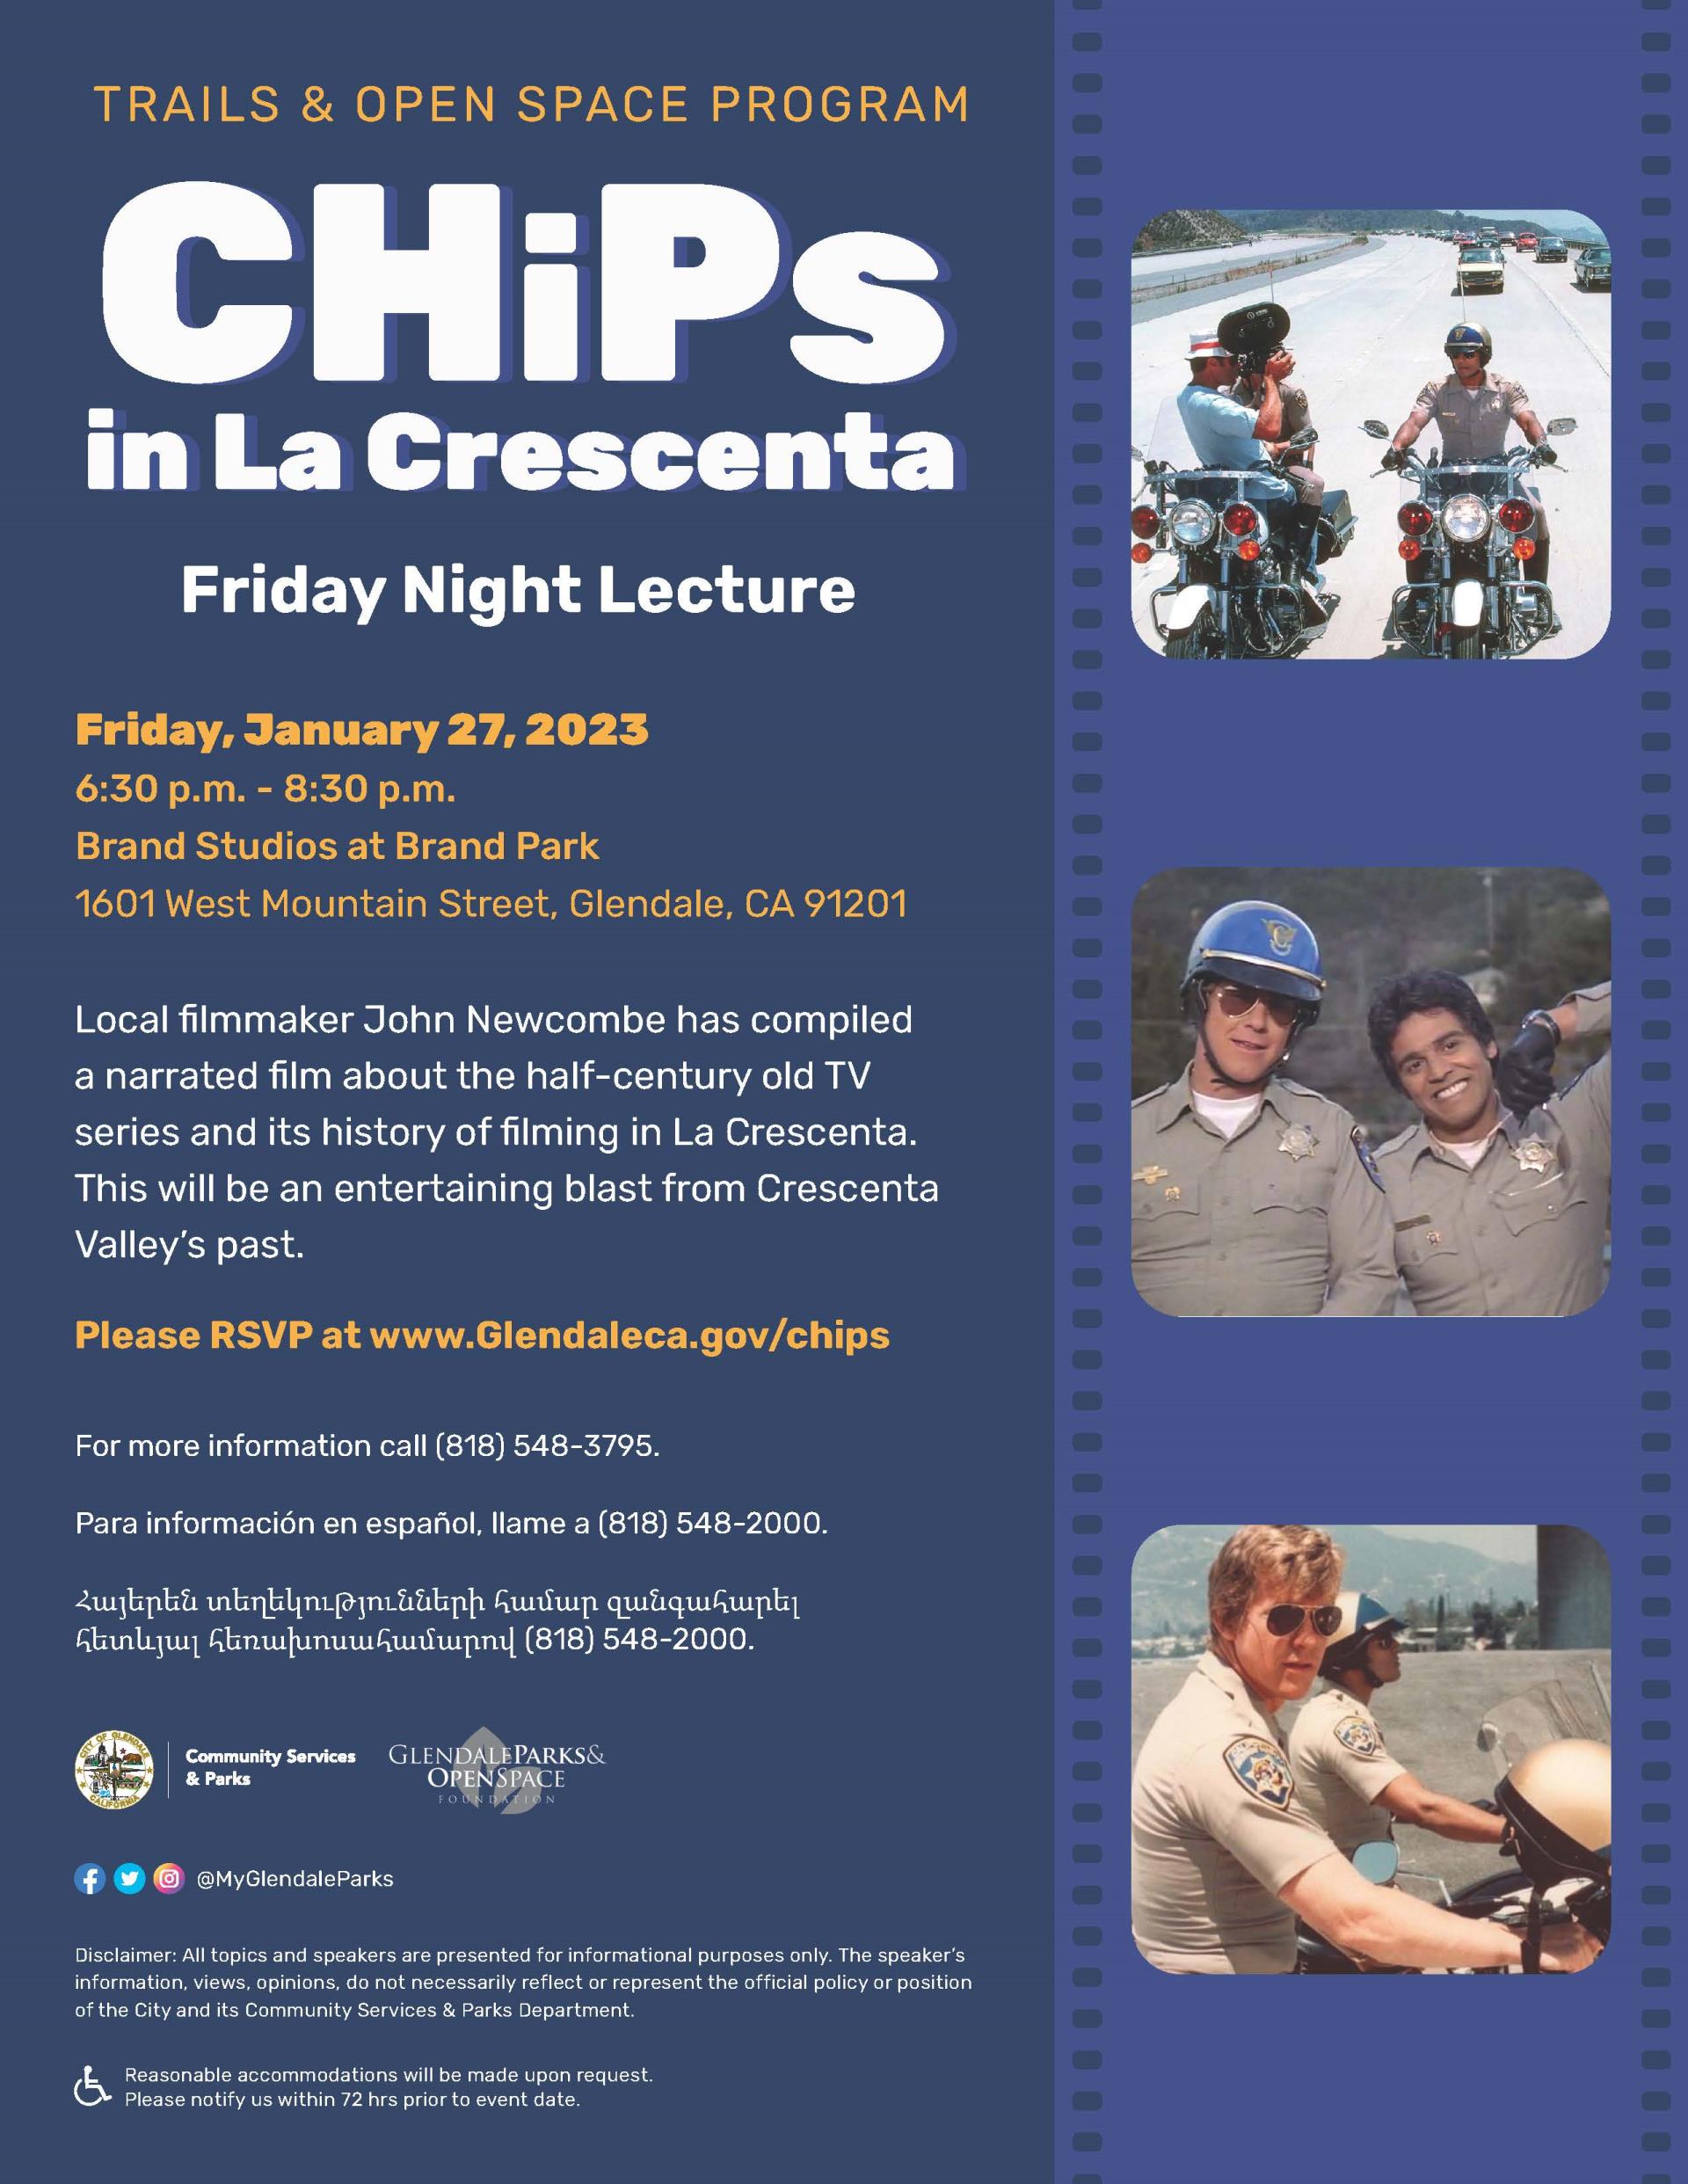 FridayNightLecture_CHiPs_2023 (003)